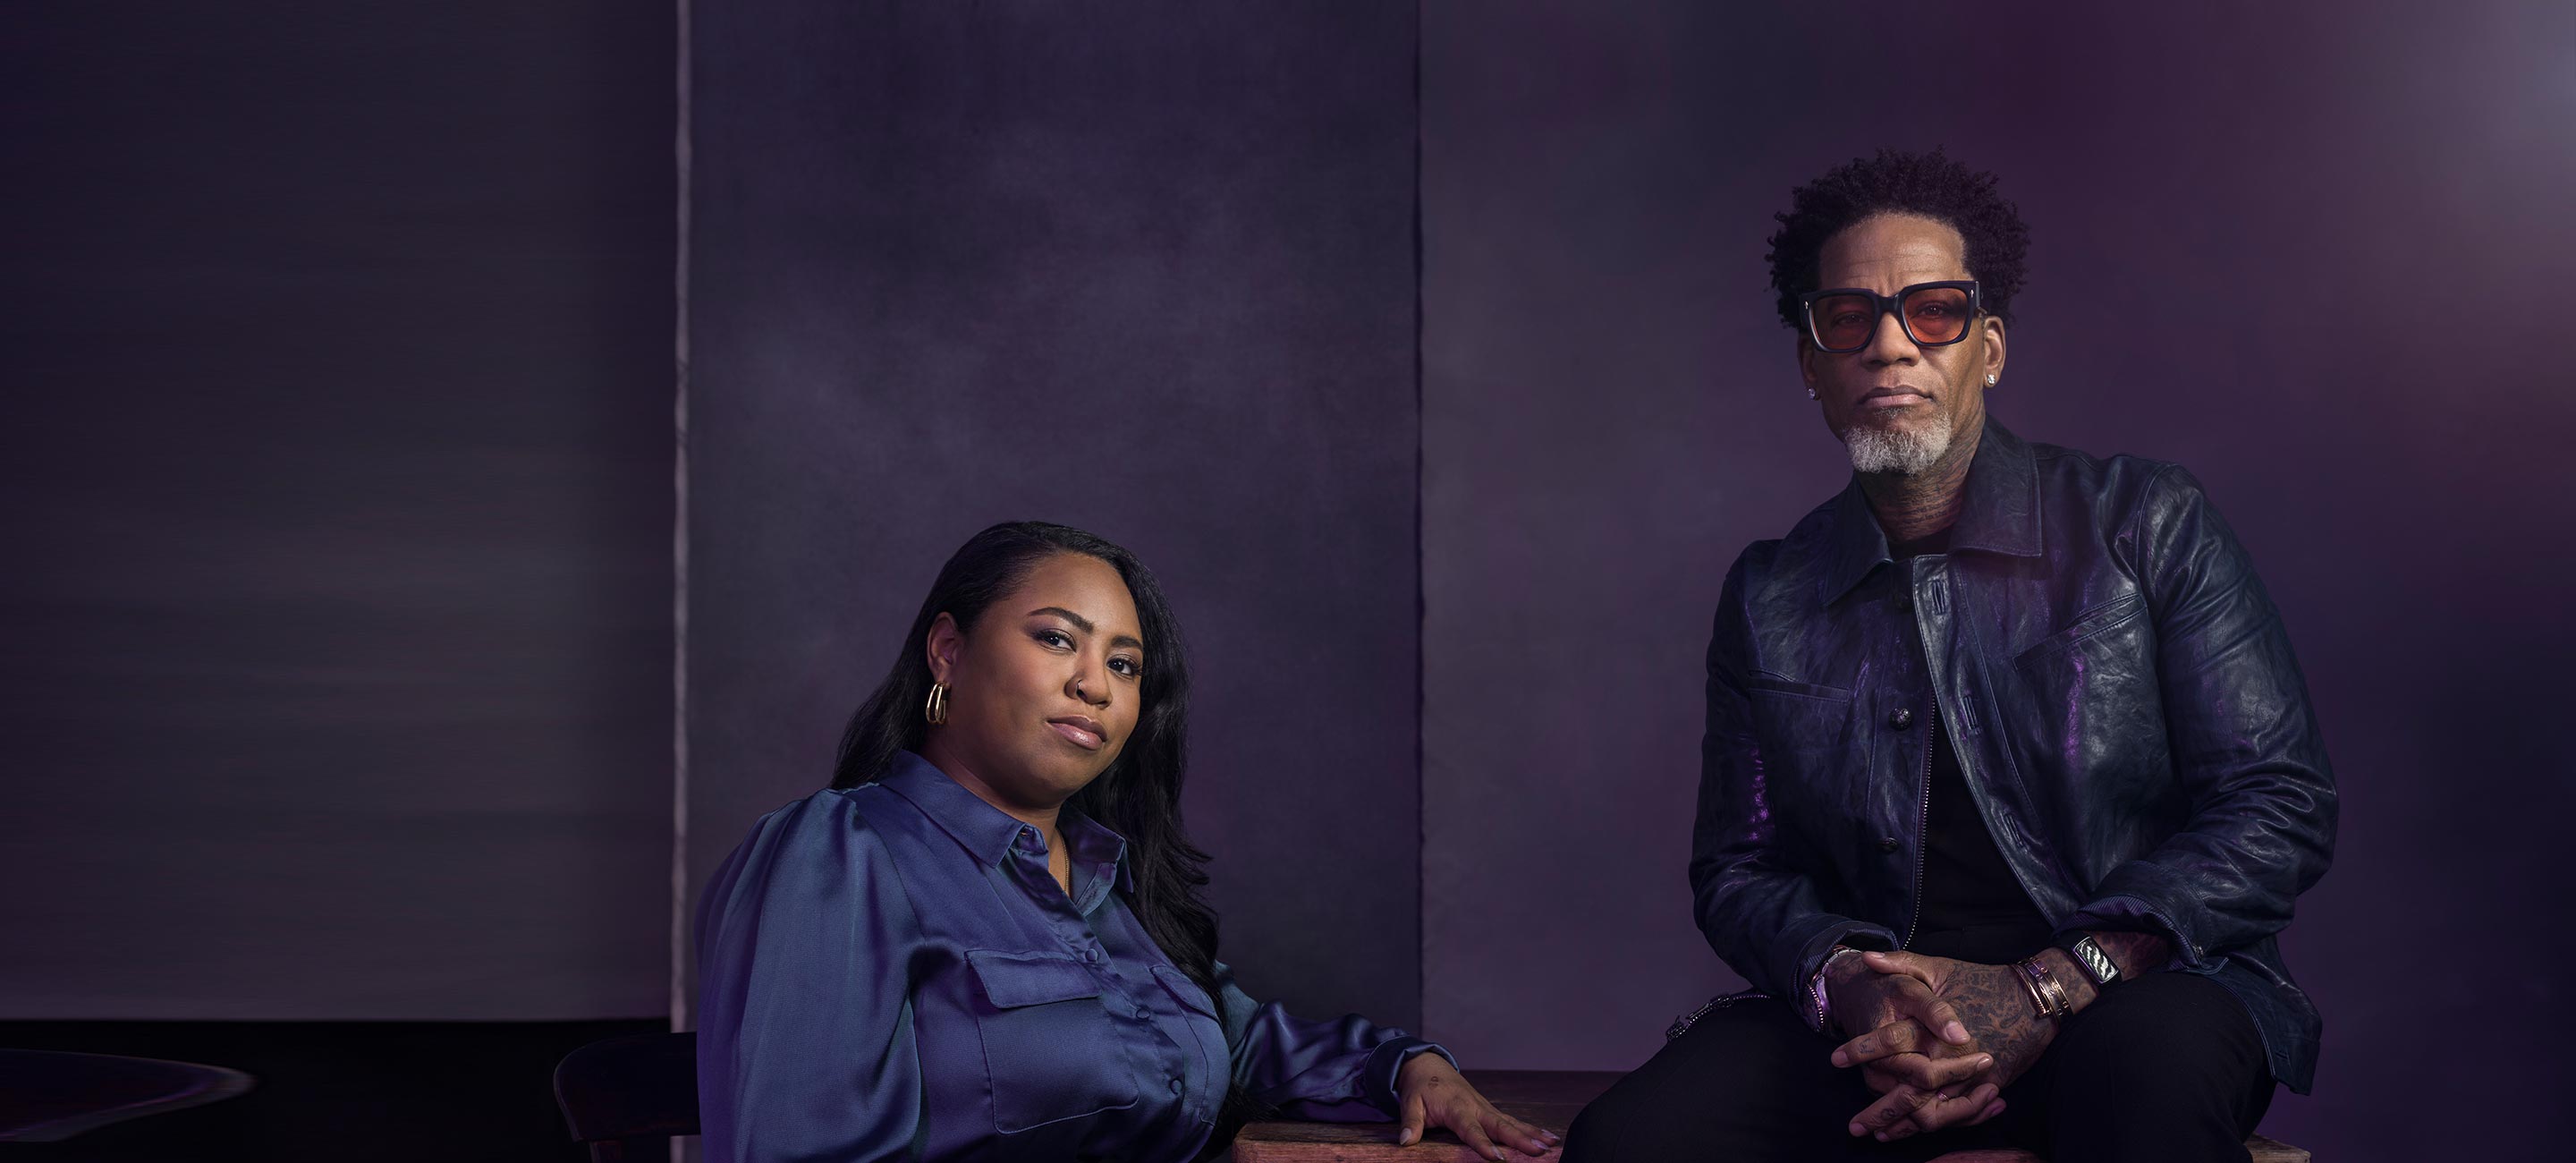 A black man & black woman seating on a chair image